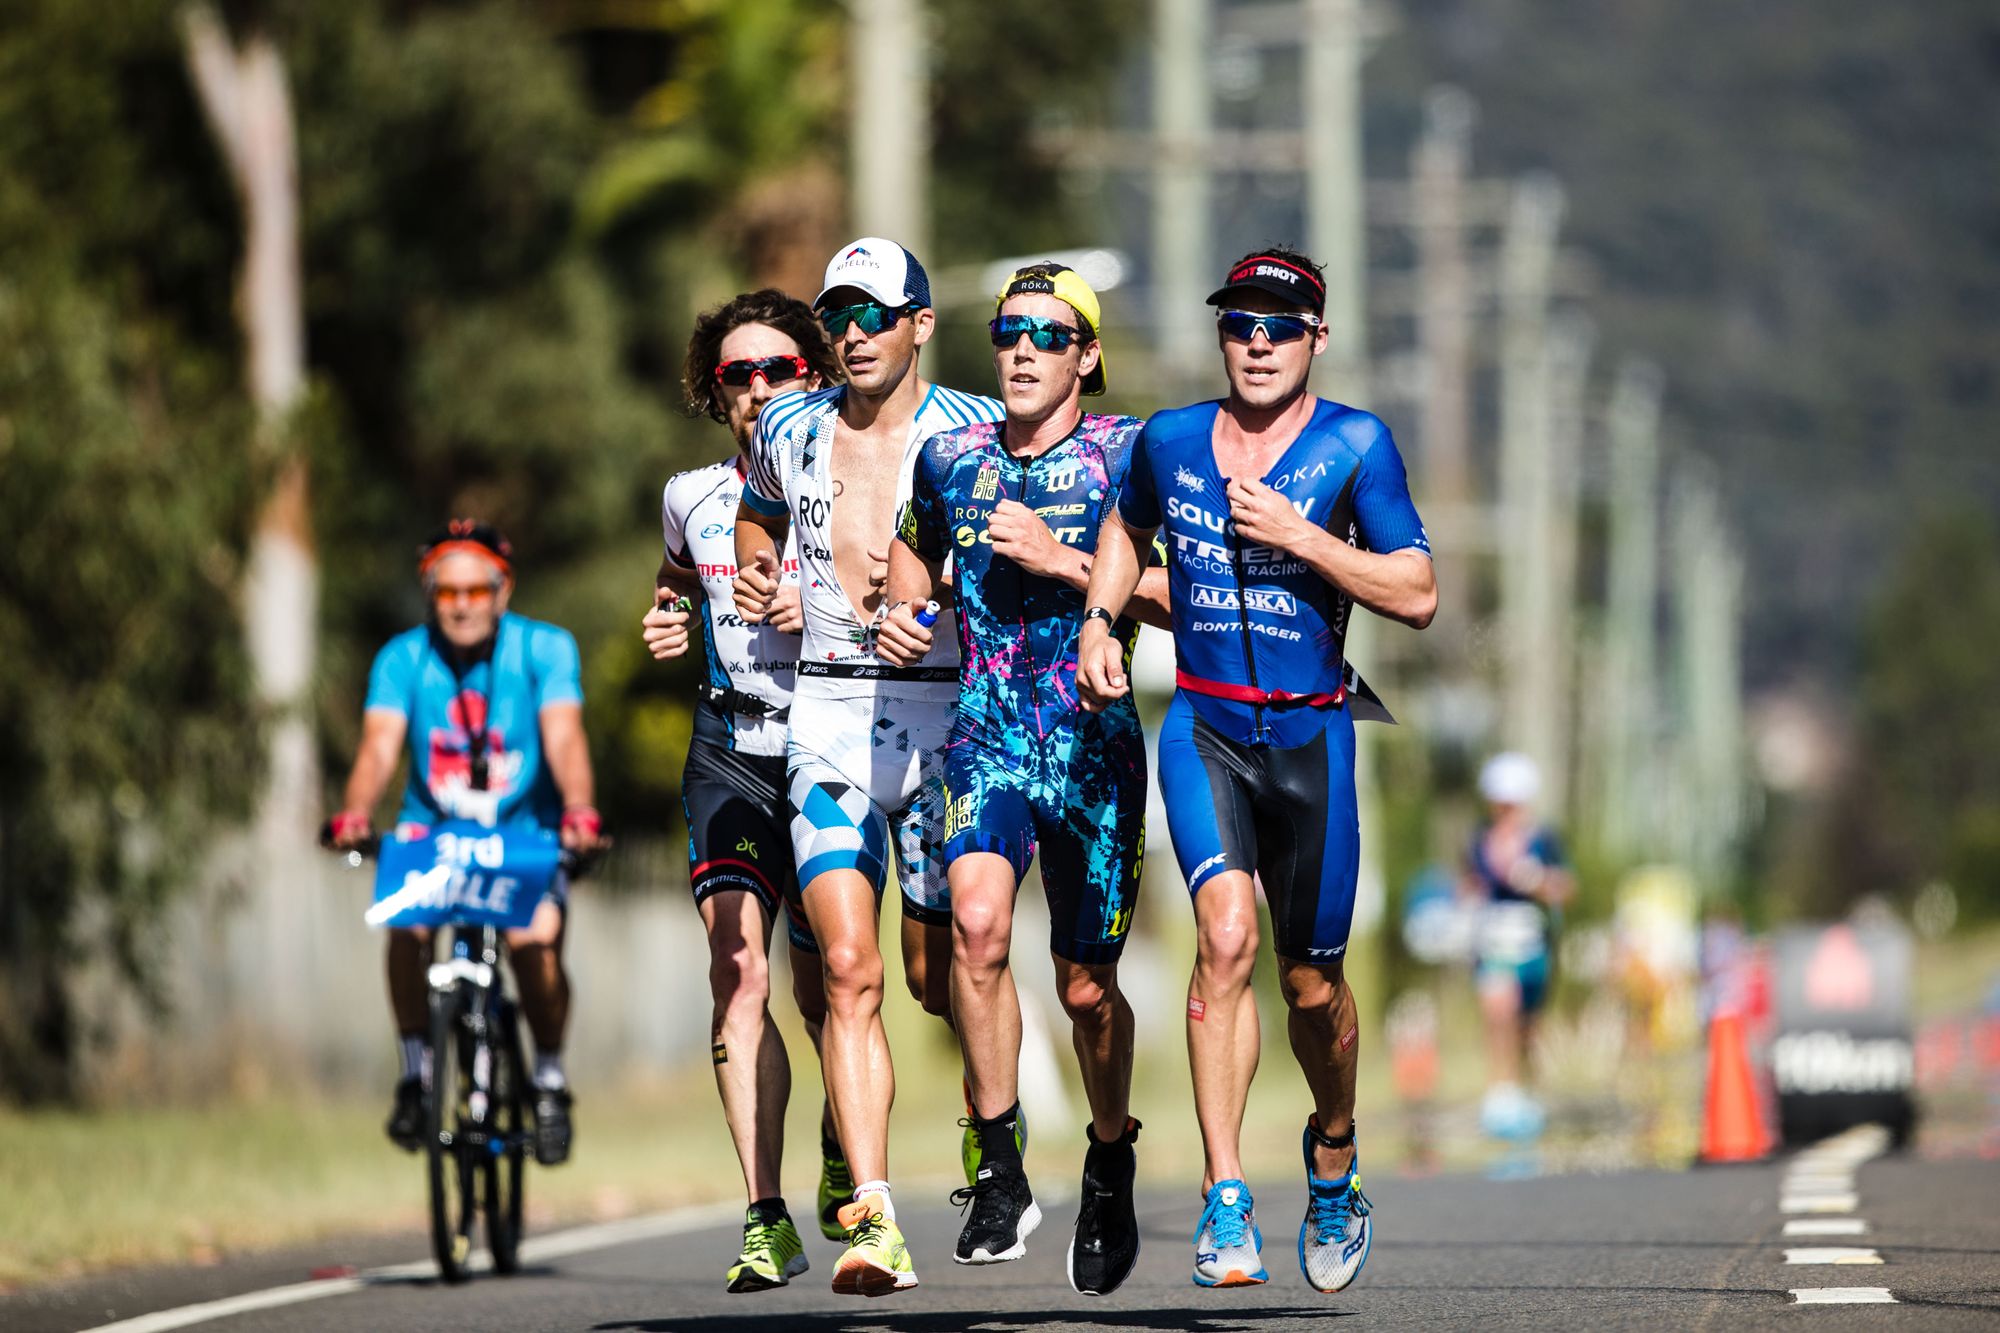 Debut Ironman 70.3 at Asia-Pacific Championship